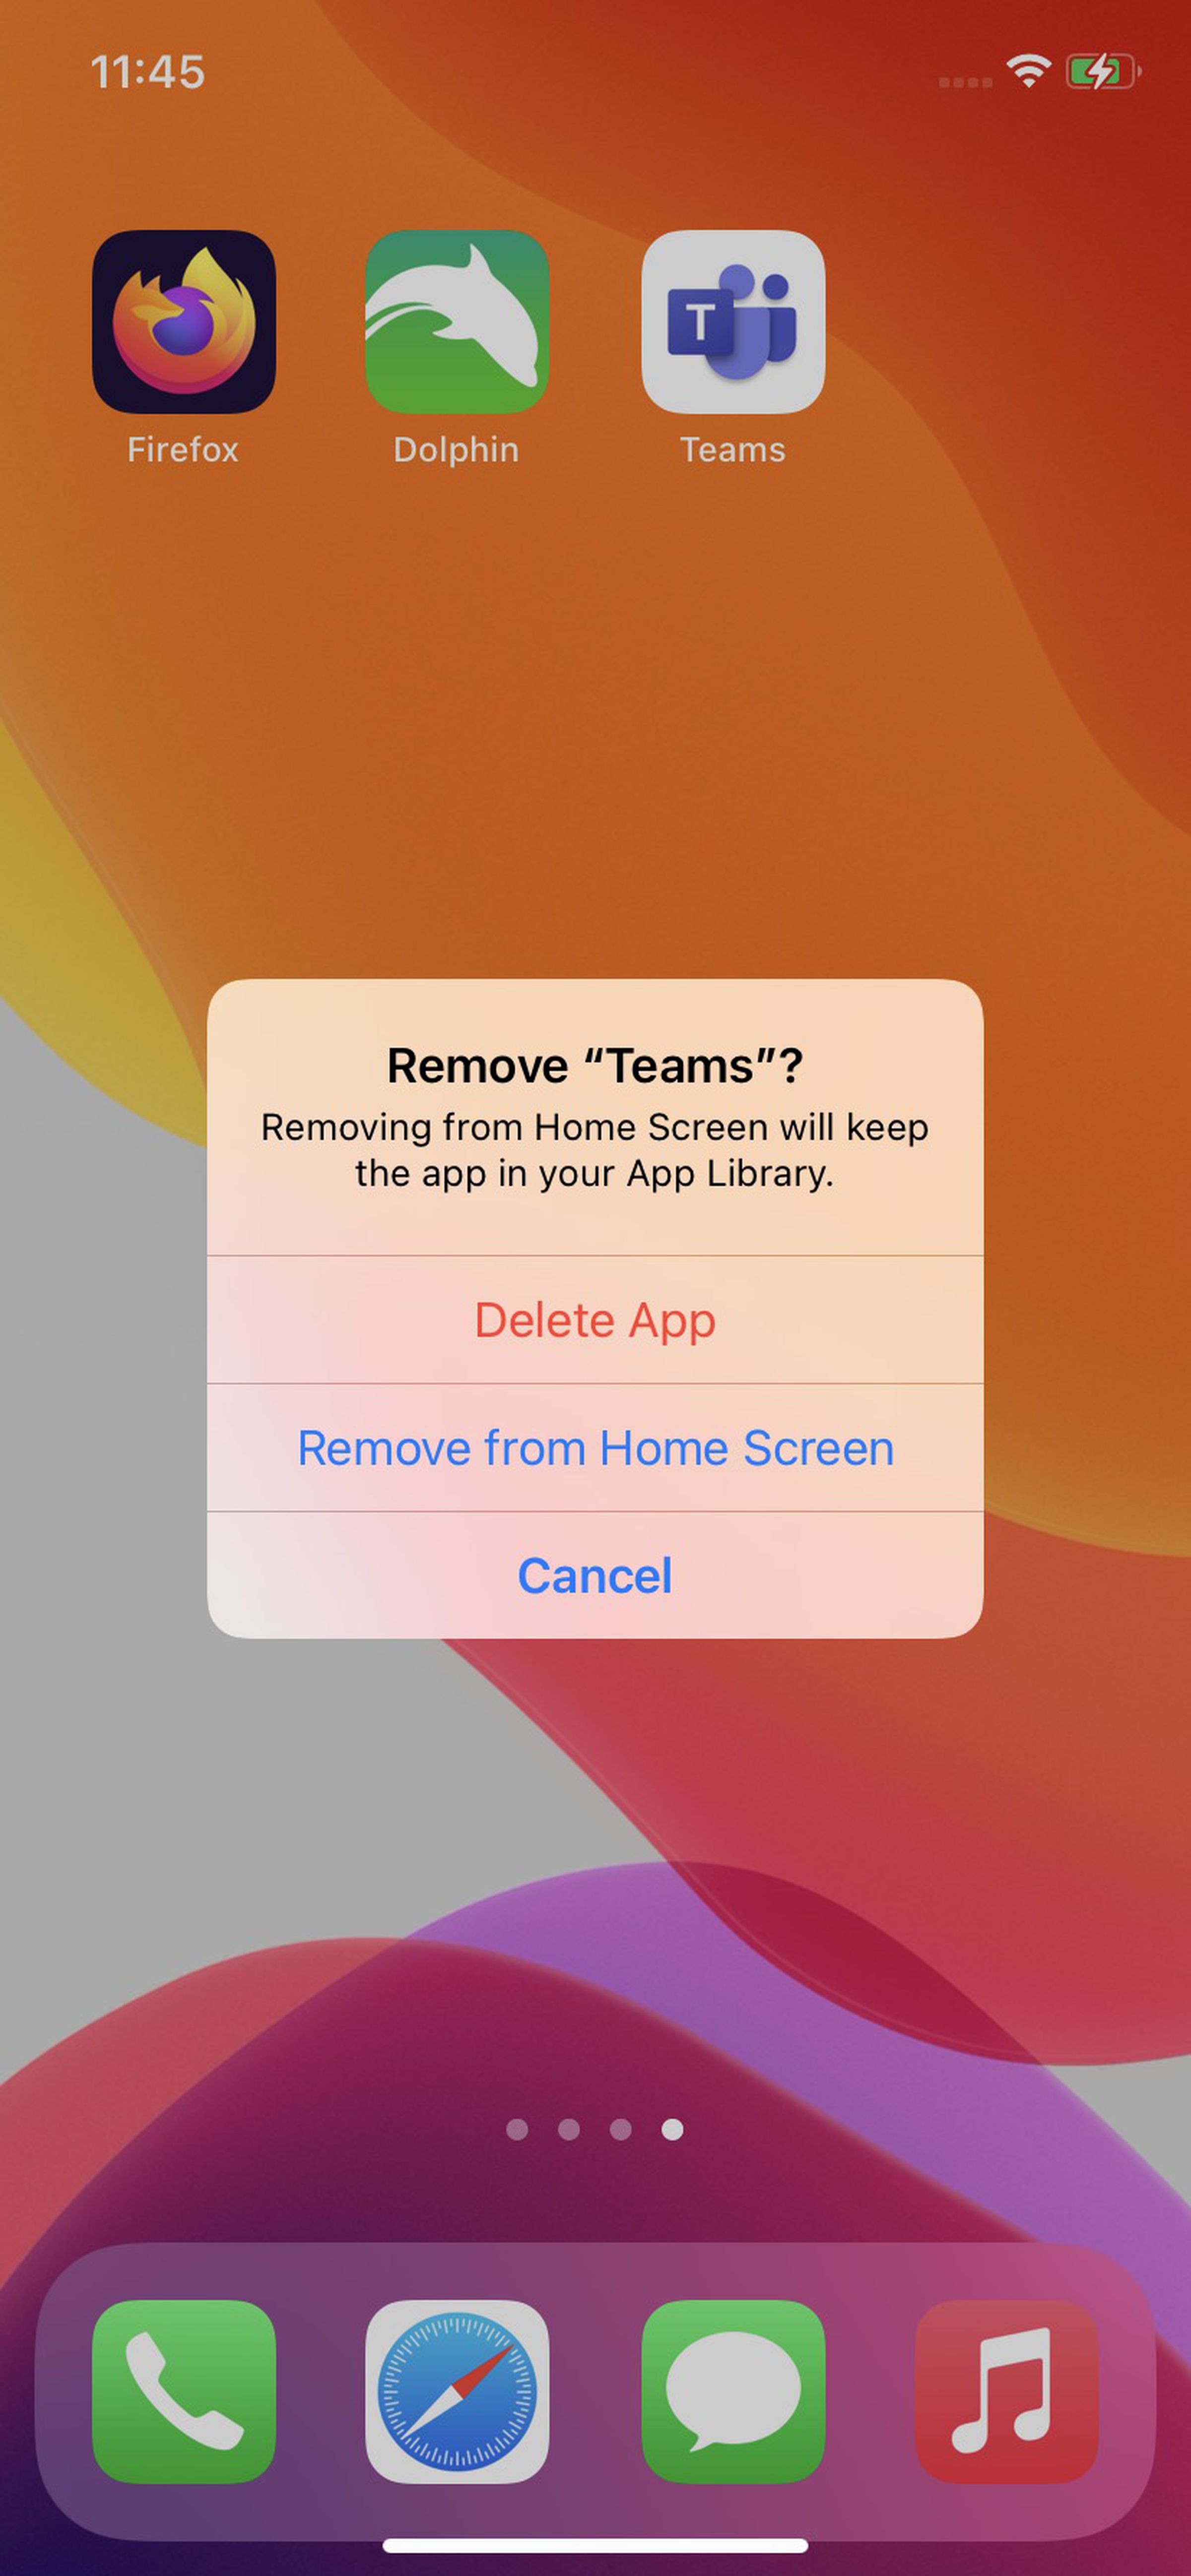 Select “Remove from Home Screen”